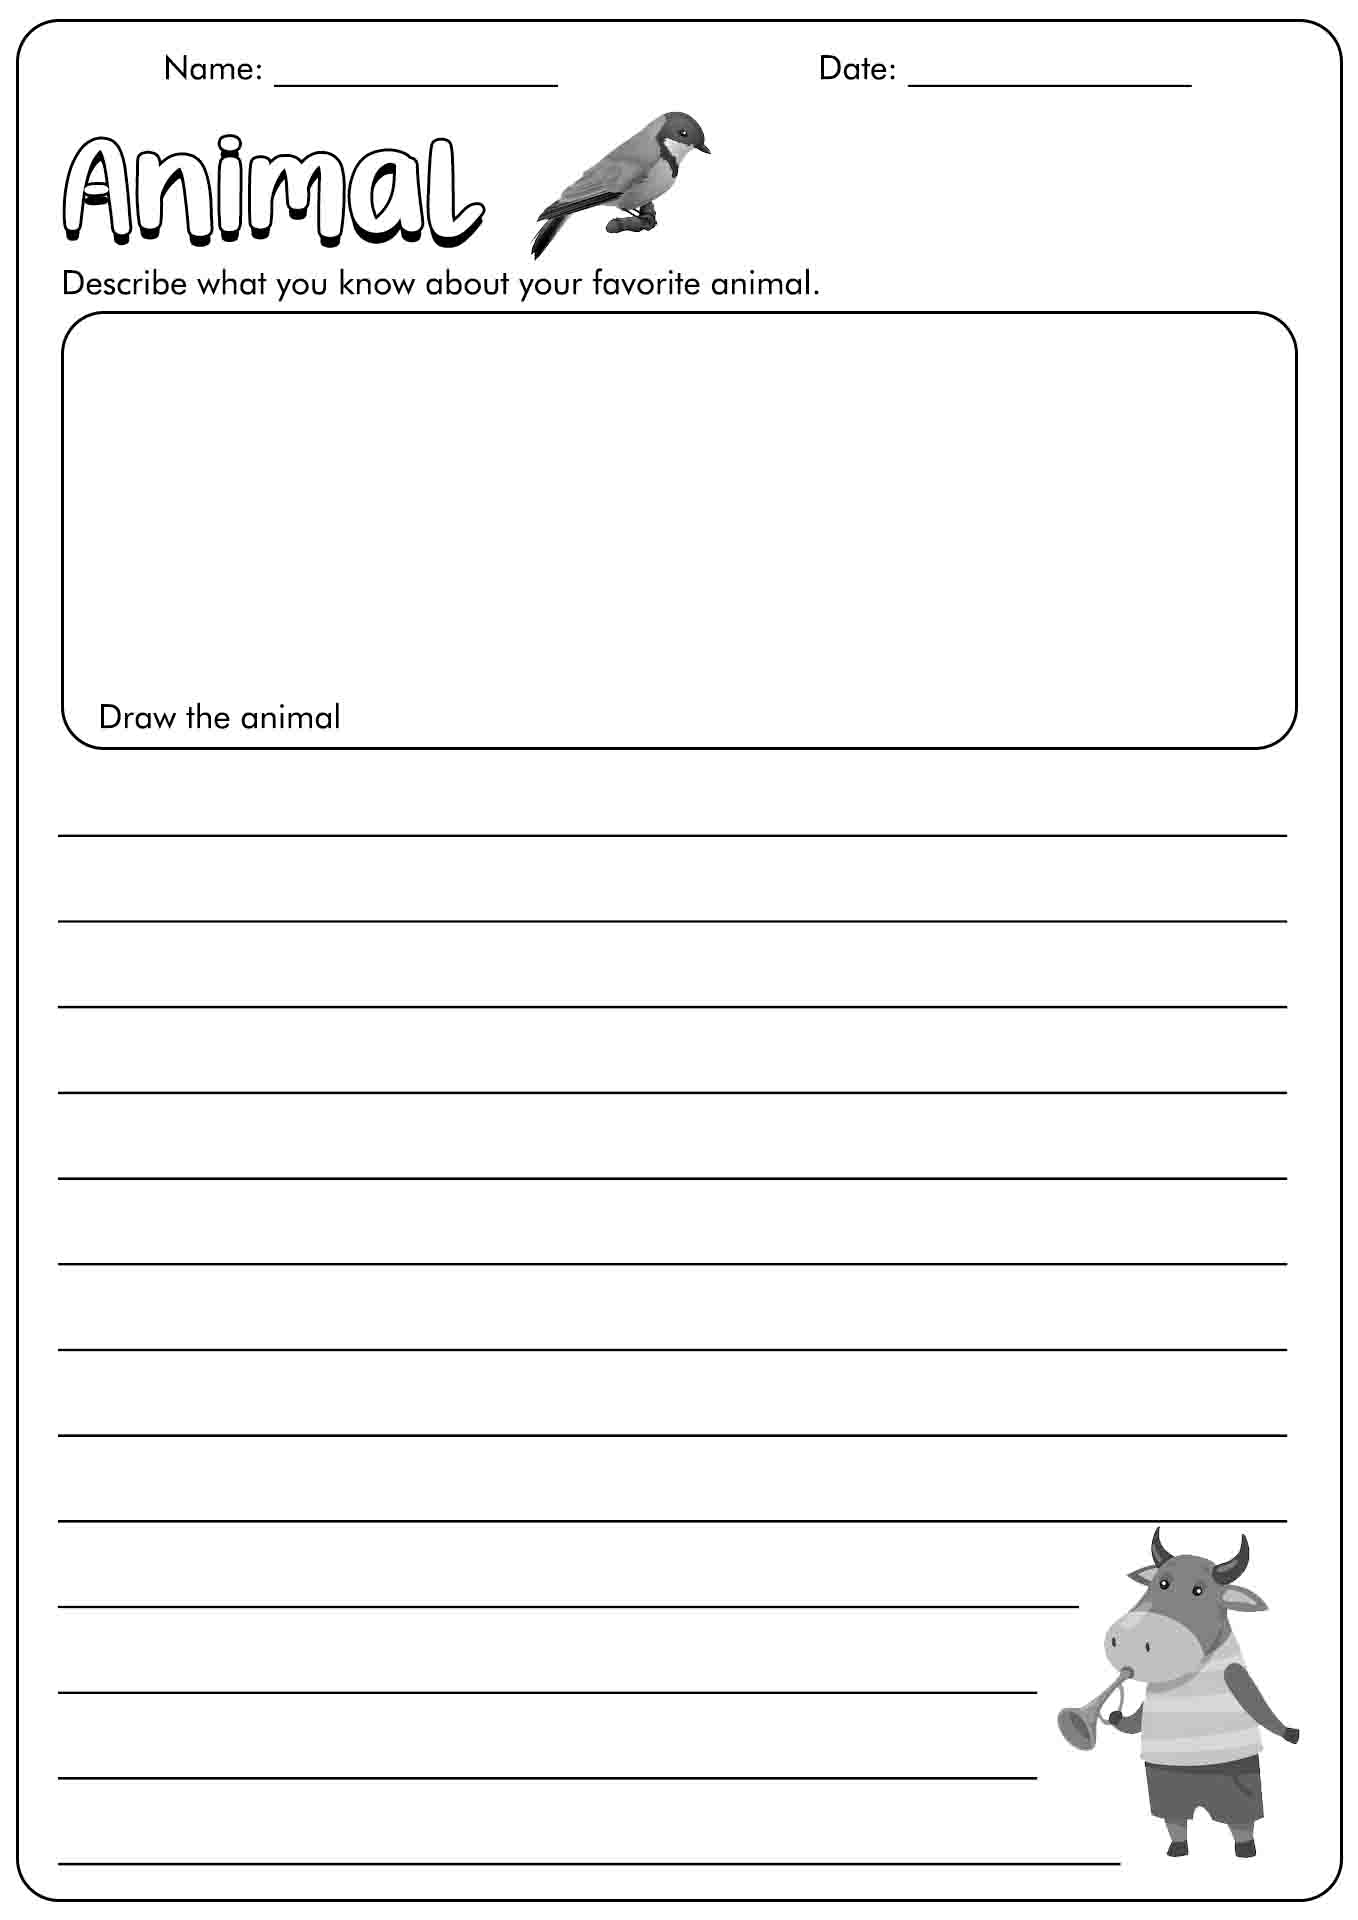 17 Best Images of Creative Writing Worksheets For Adults Creative